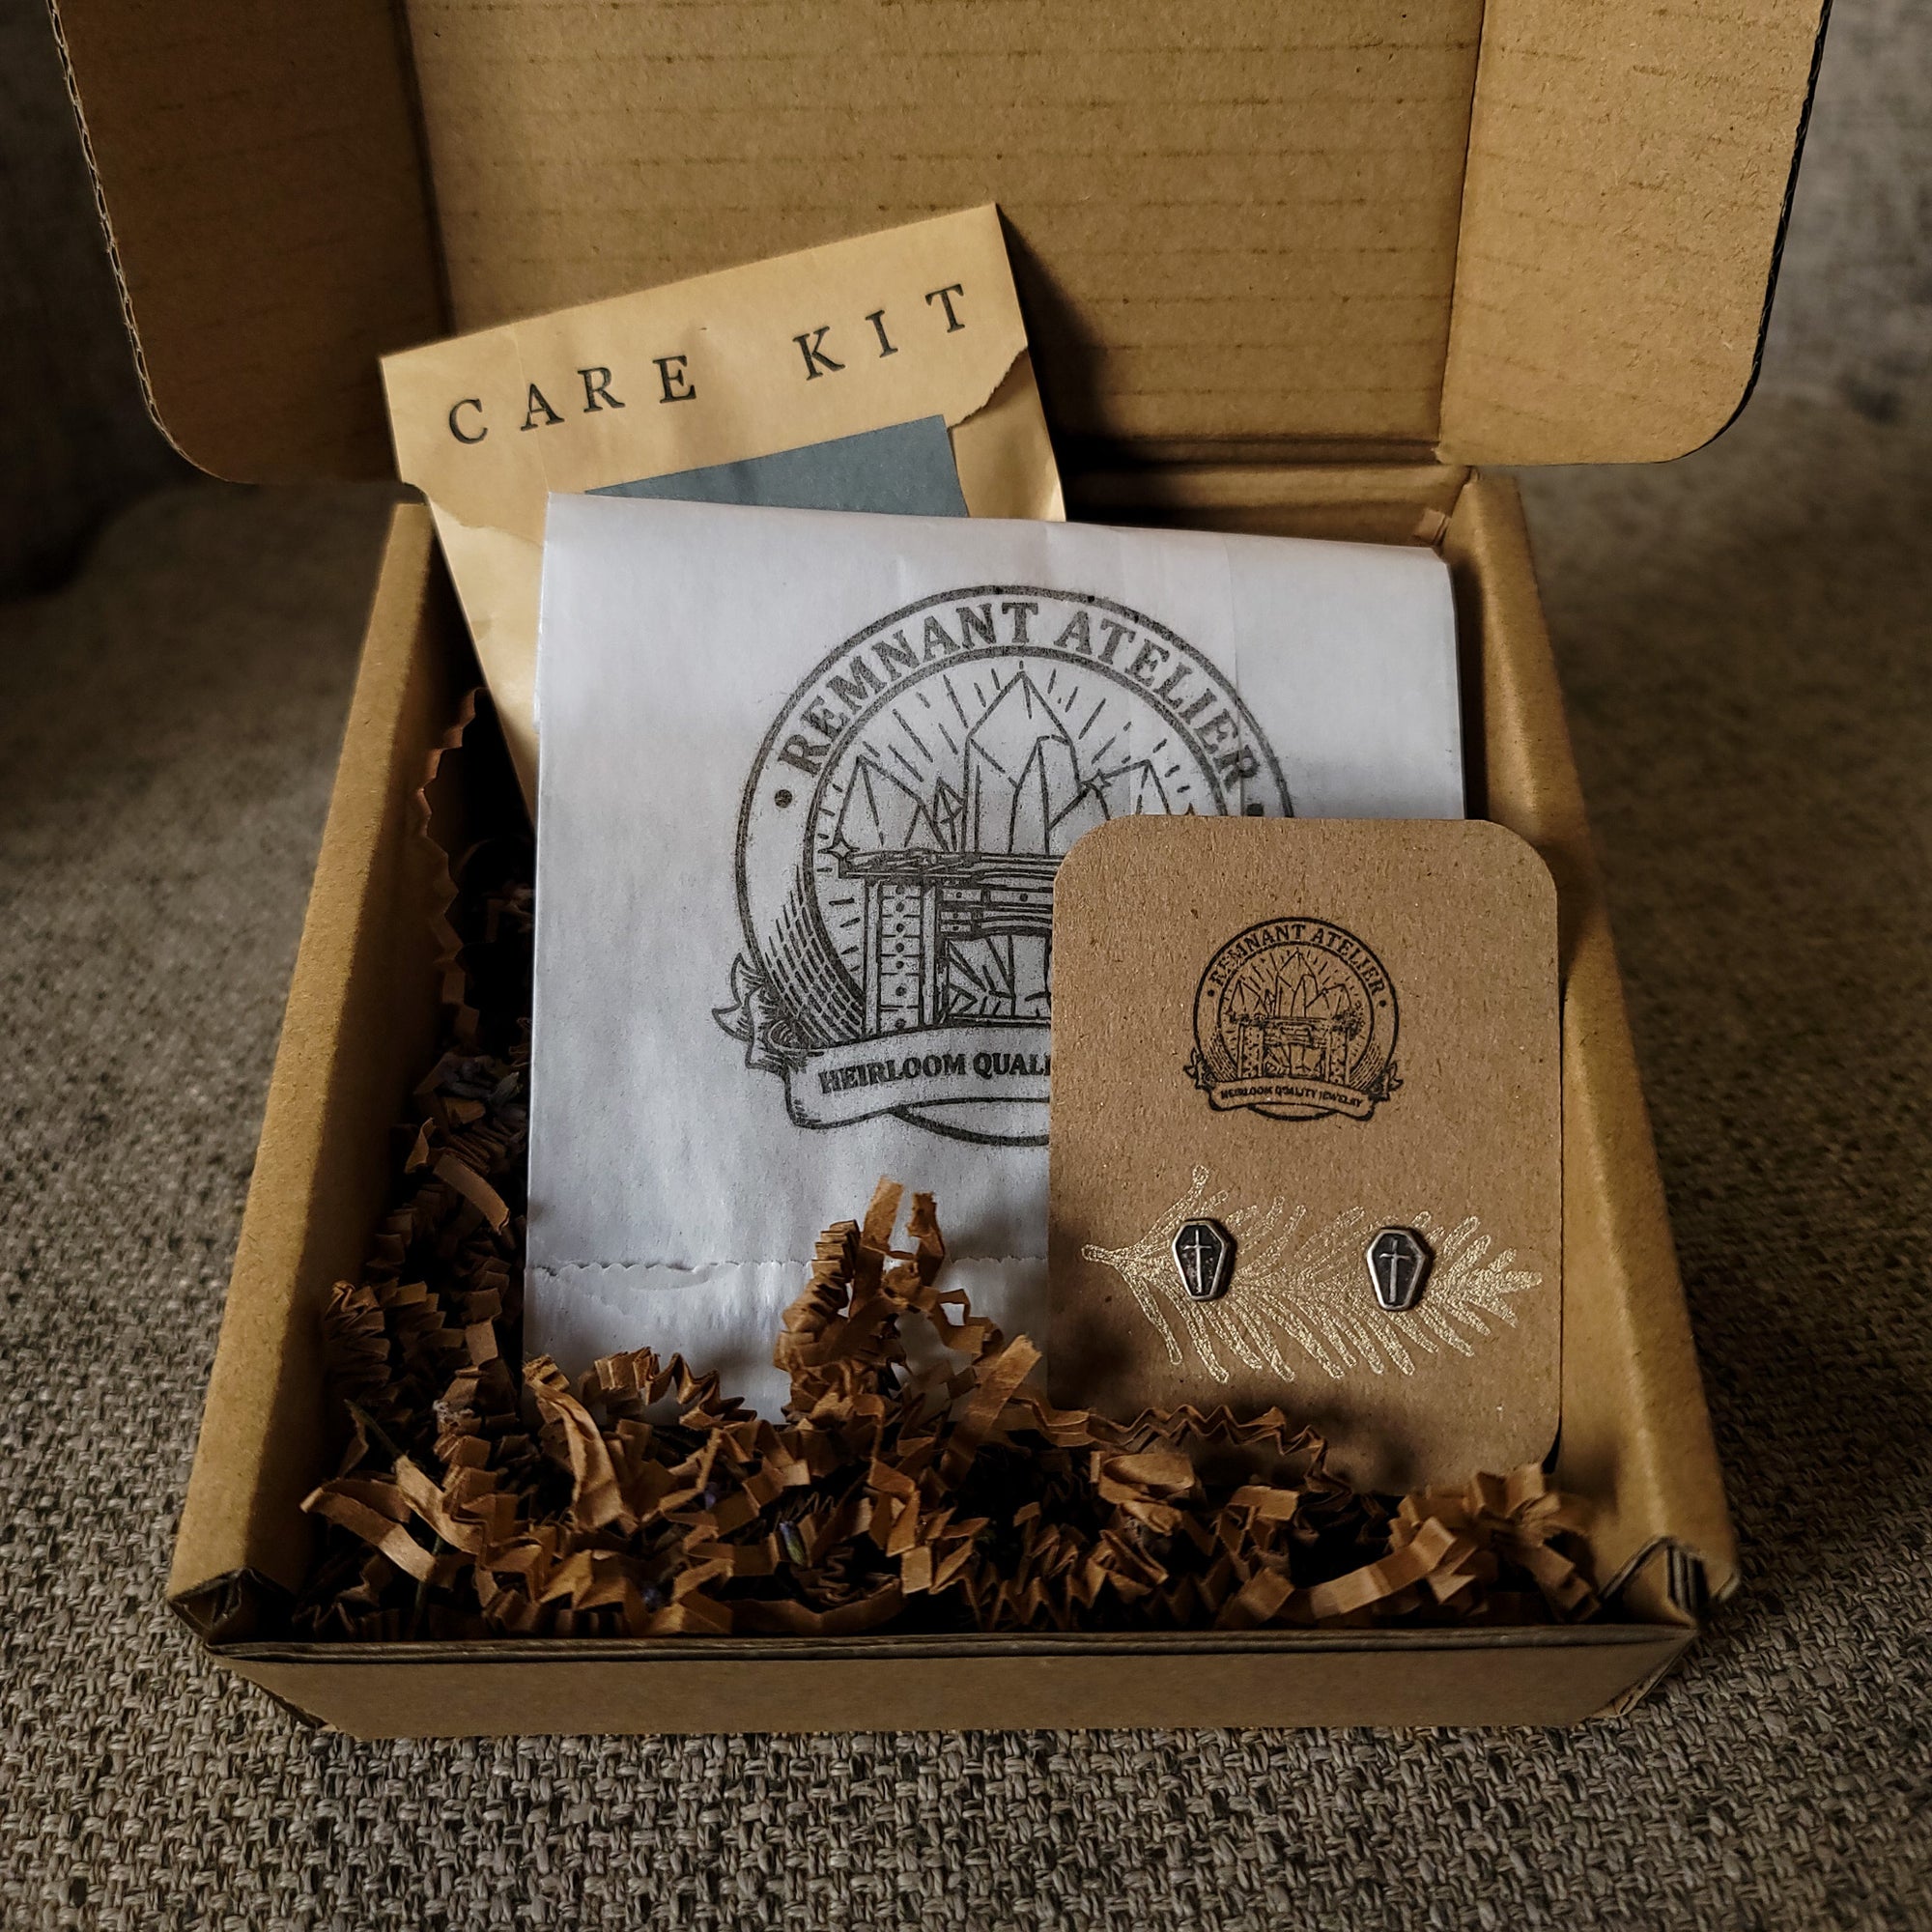 This photo shows a pair of handmade sterling silver coffin shaped stud earrings displayed on a cardboard earring card inside a cardboard box, surrounded by shredded cardboard. The package also includes a care kit to keep the jewelry in top condition.